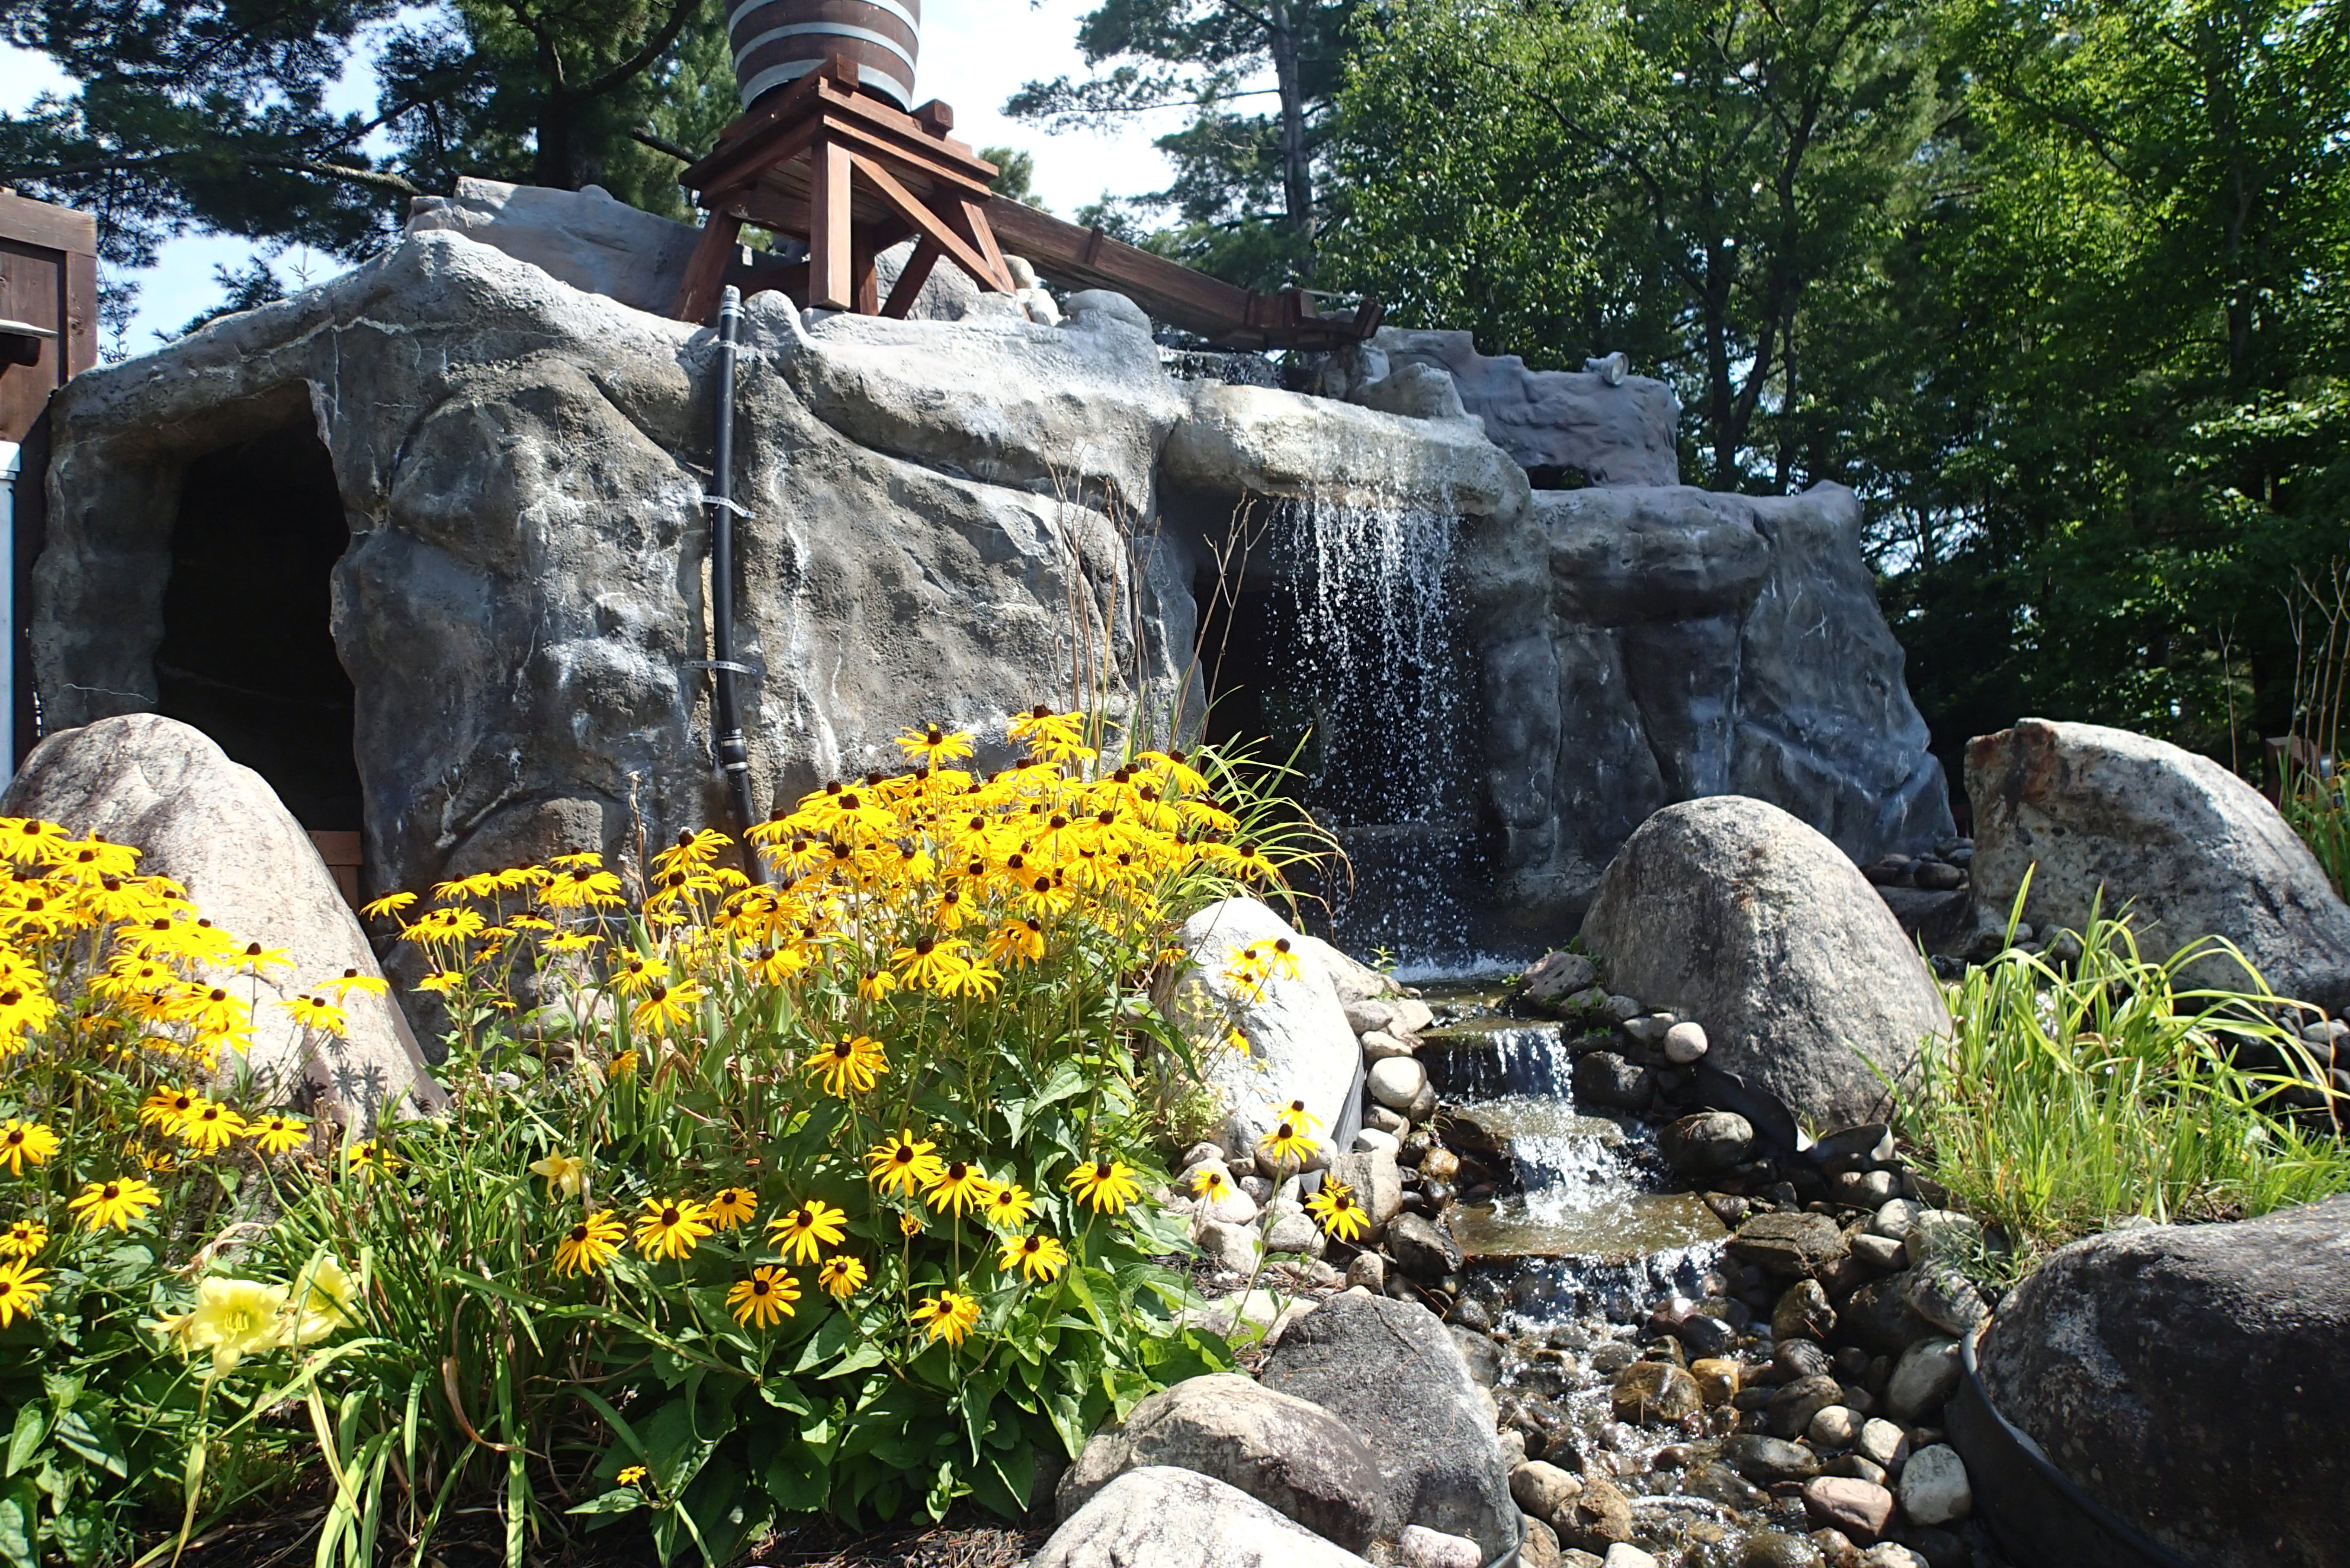 Black-eyed susan flowers in front of a rocky waterfall feature on a mini golf course.